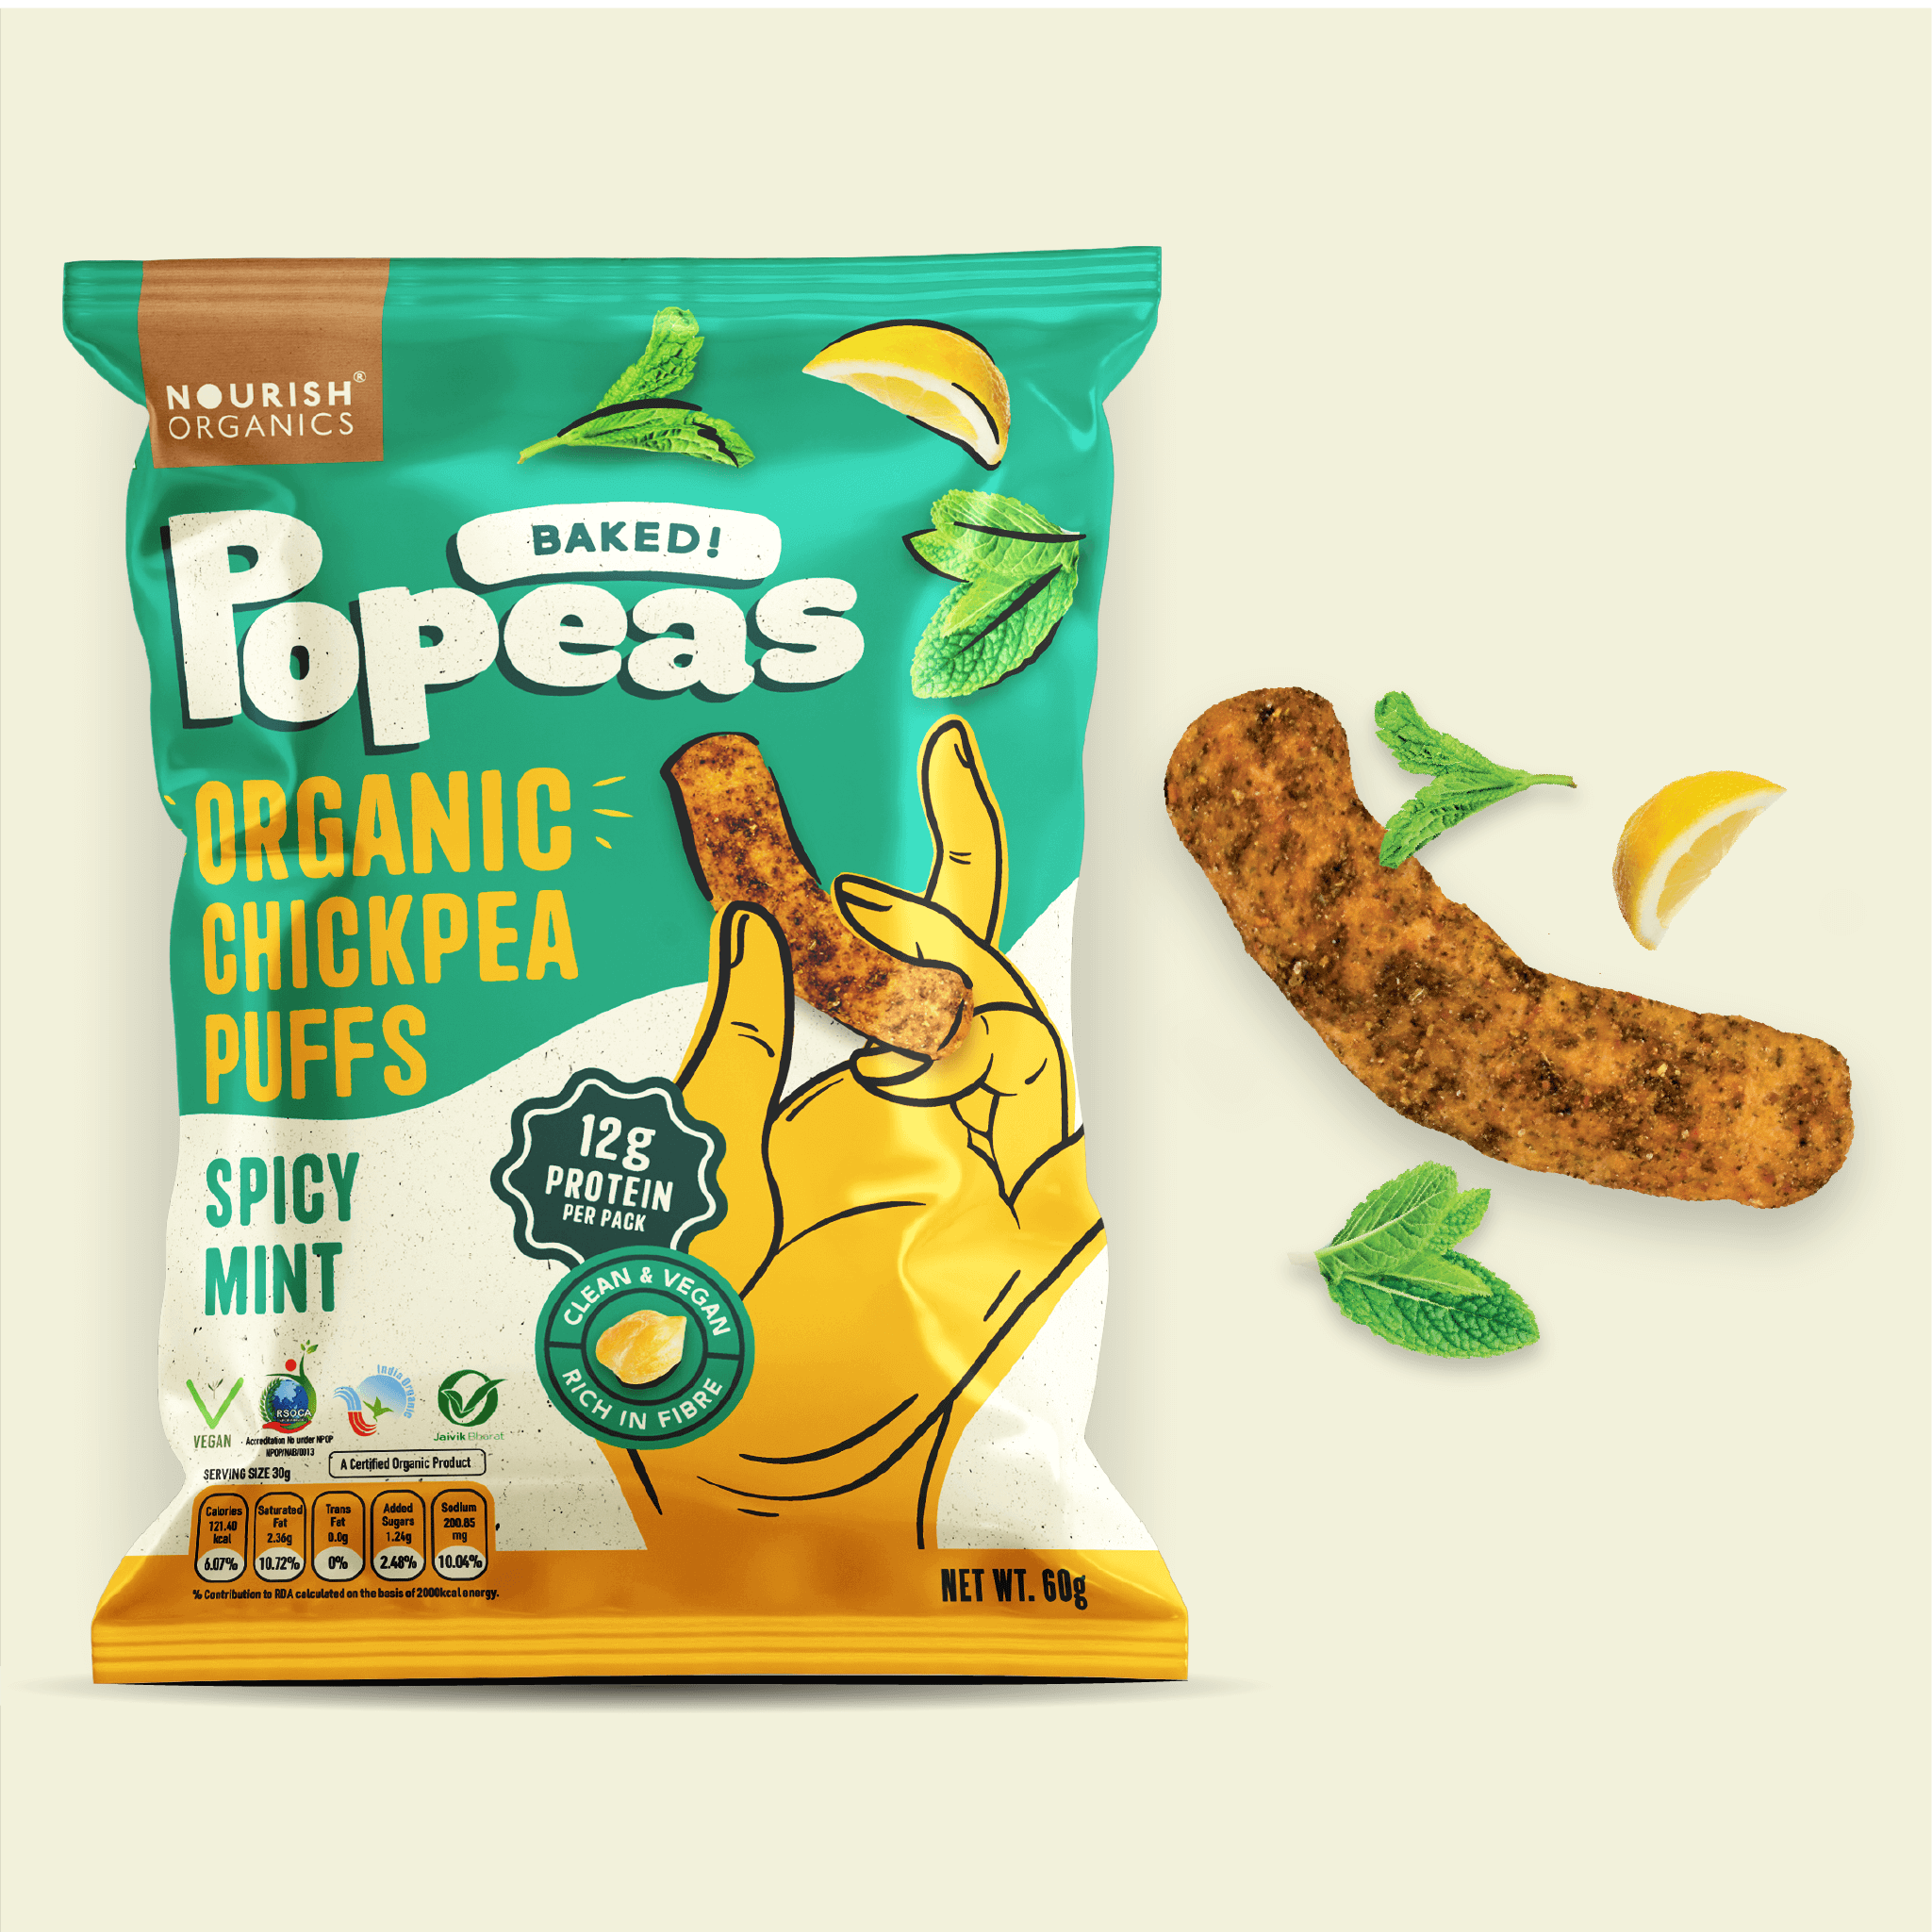 Popeas  Spicy Mint Product